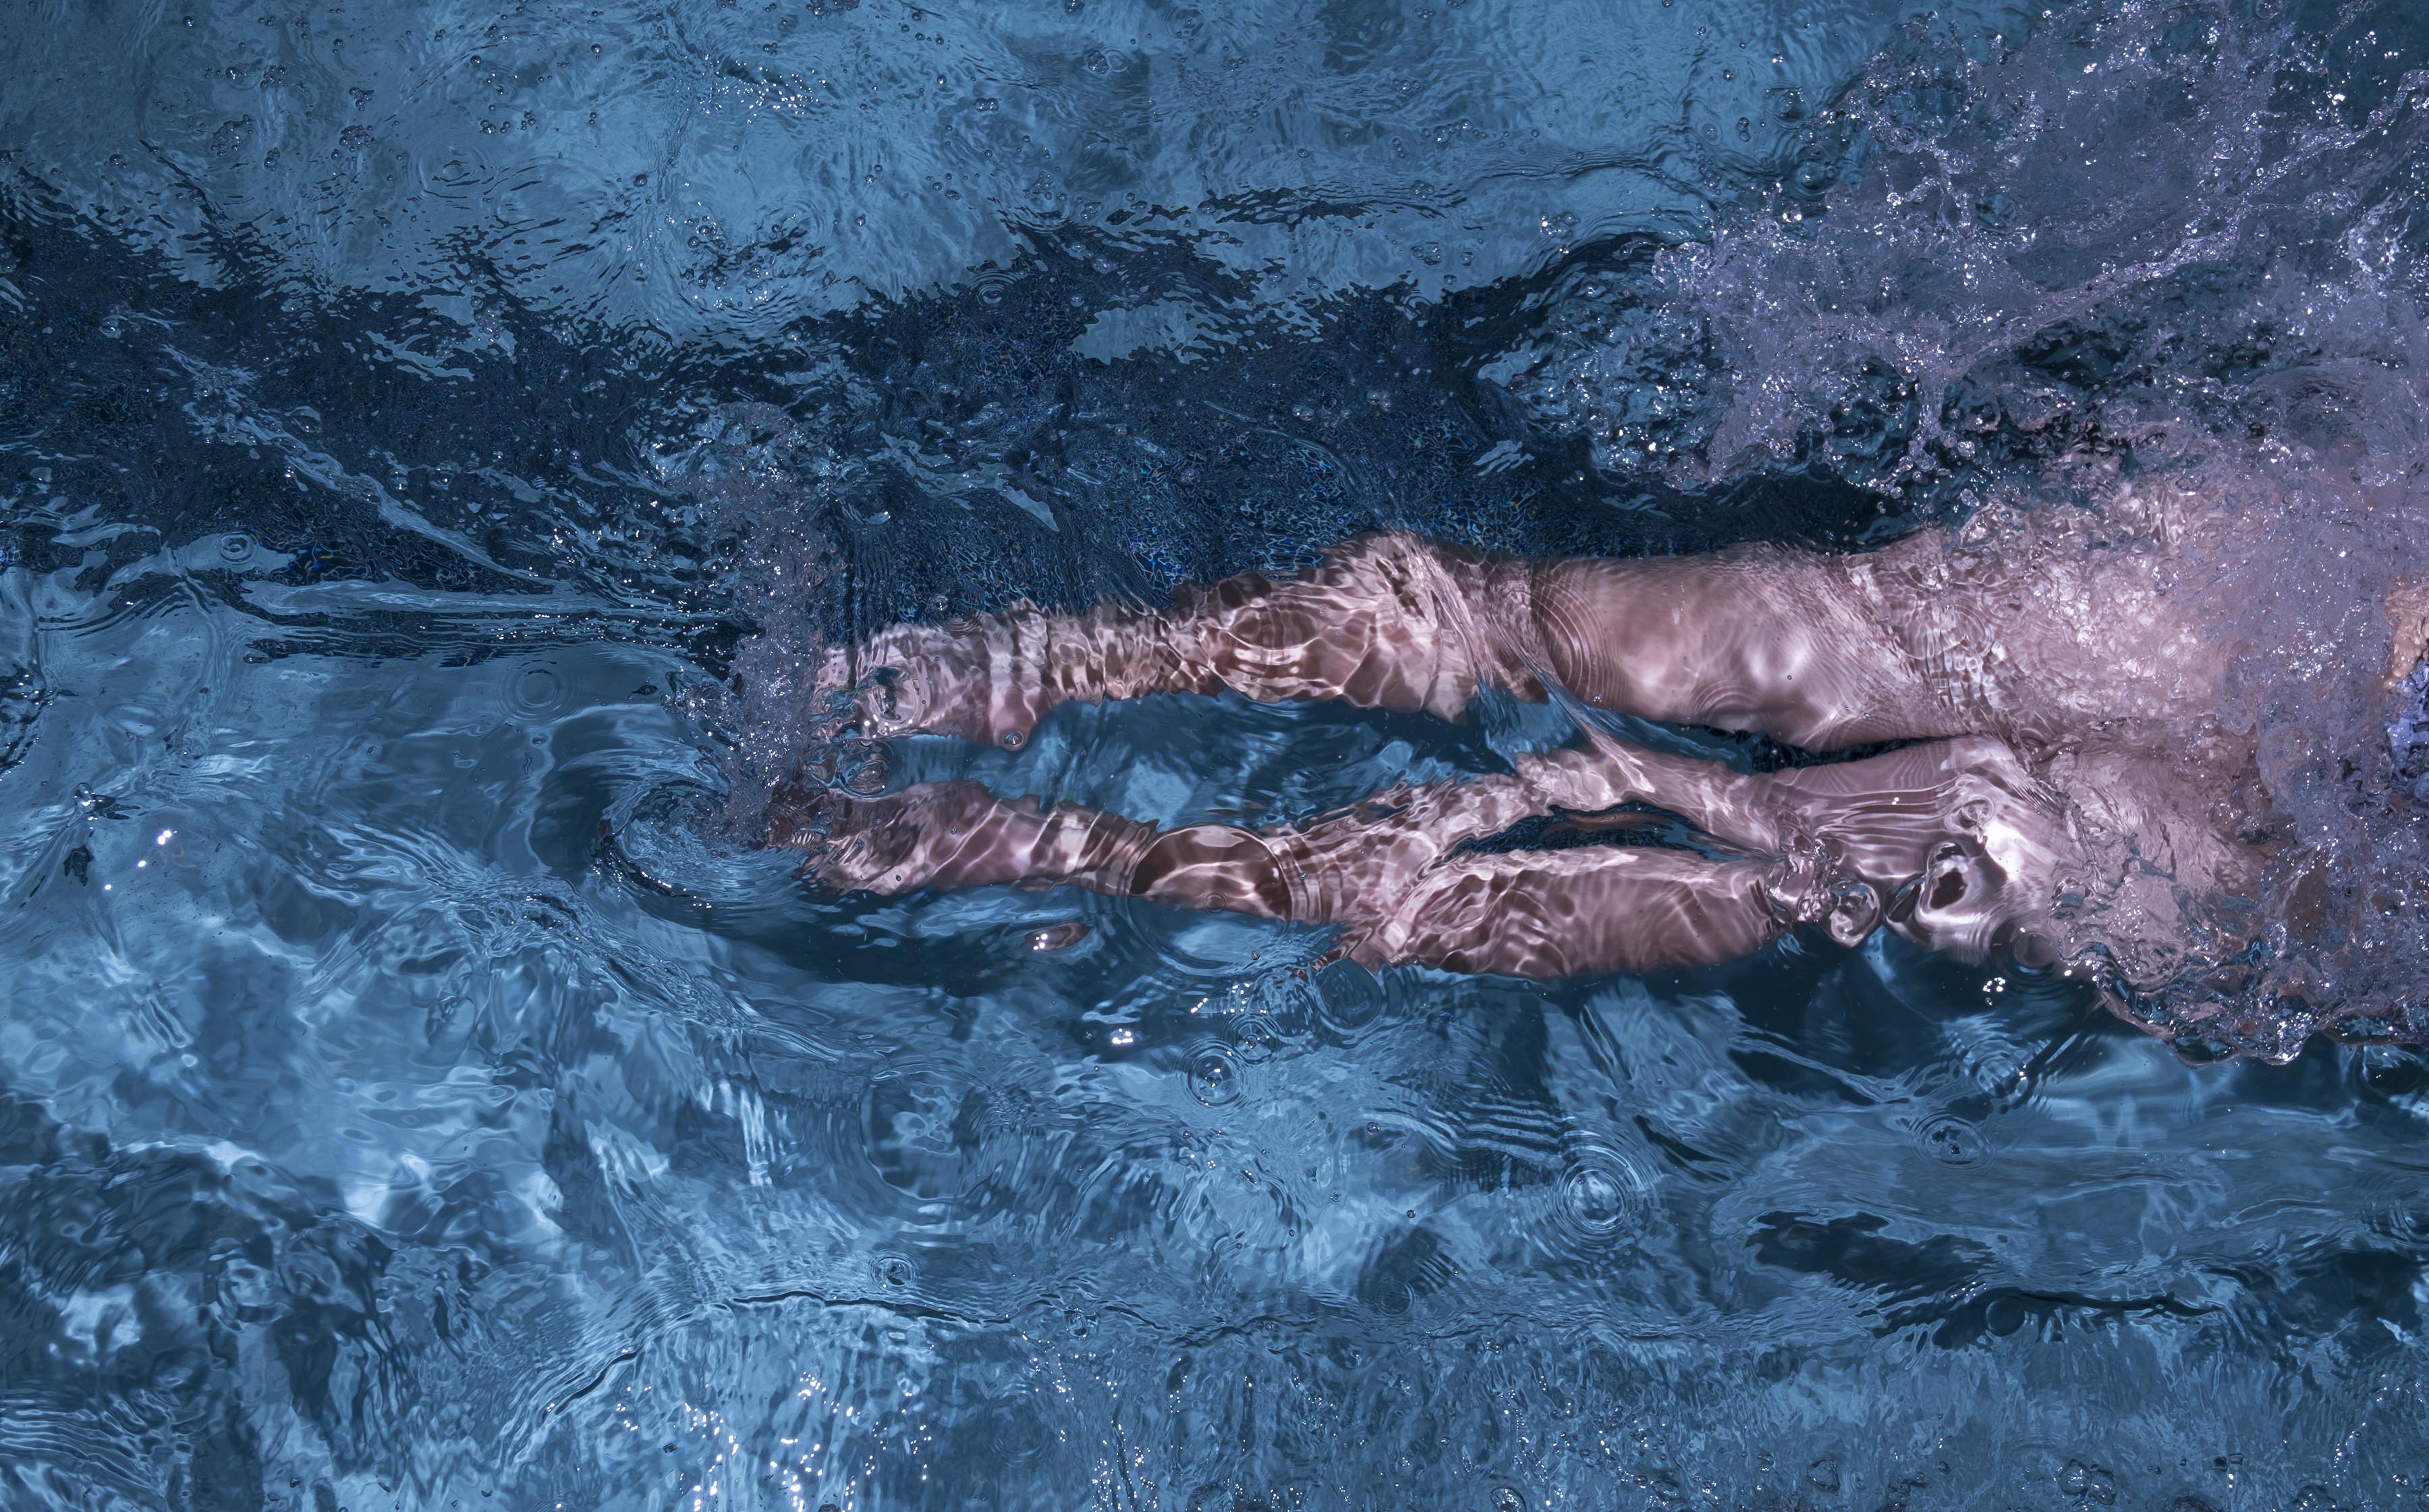 A photograph of a woman's legs disappearing to the right as she swims in a pool lane, splashing lots of water, shot from above.